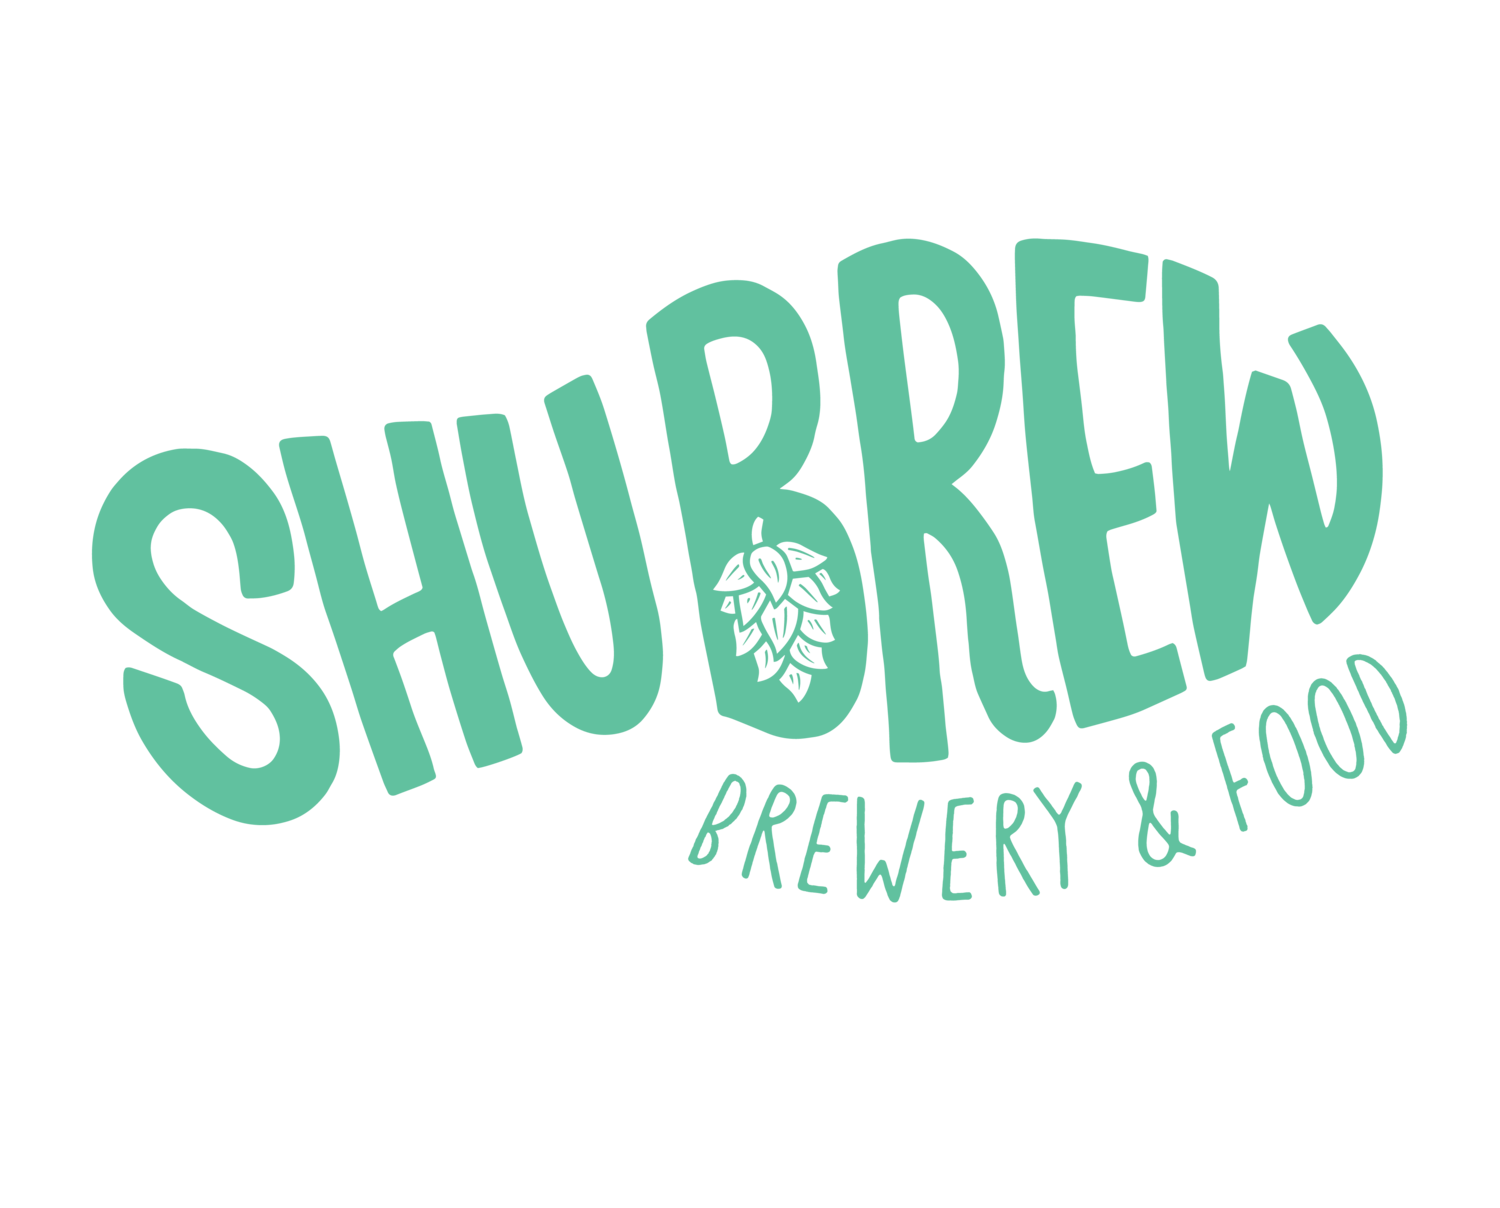 View ShuBrew